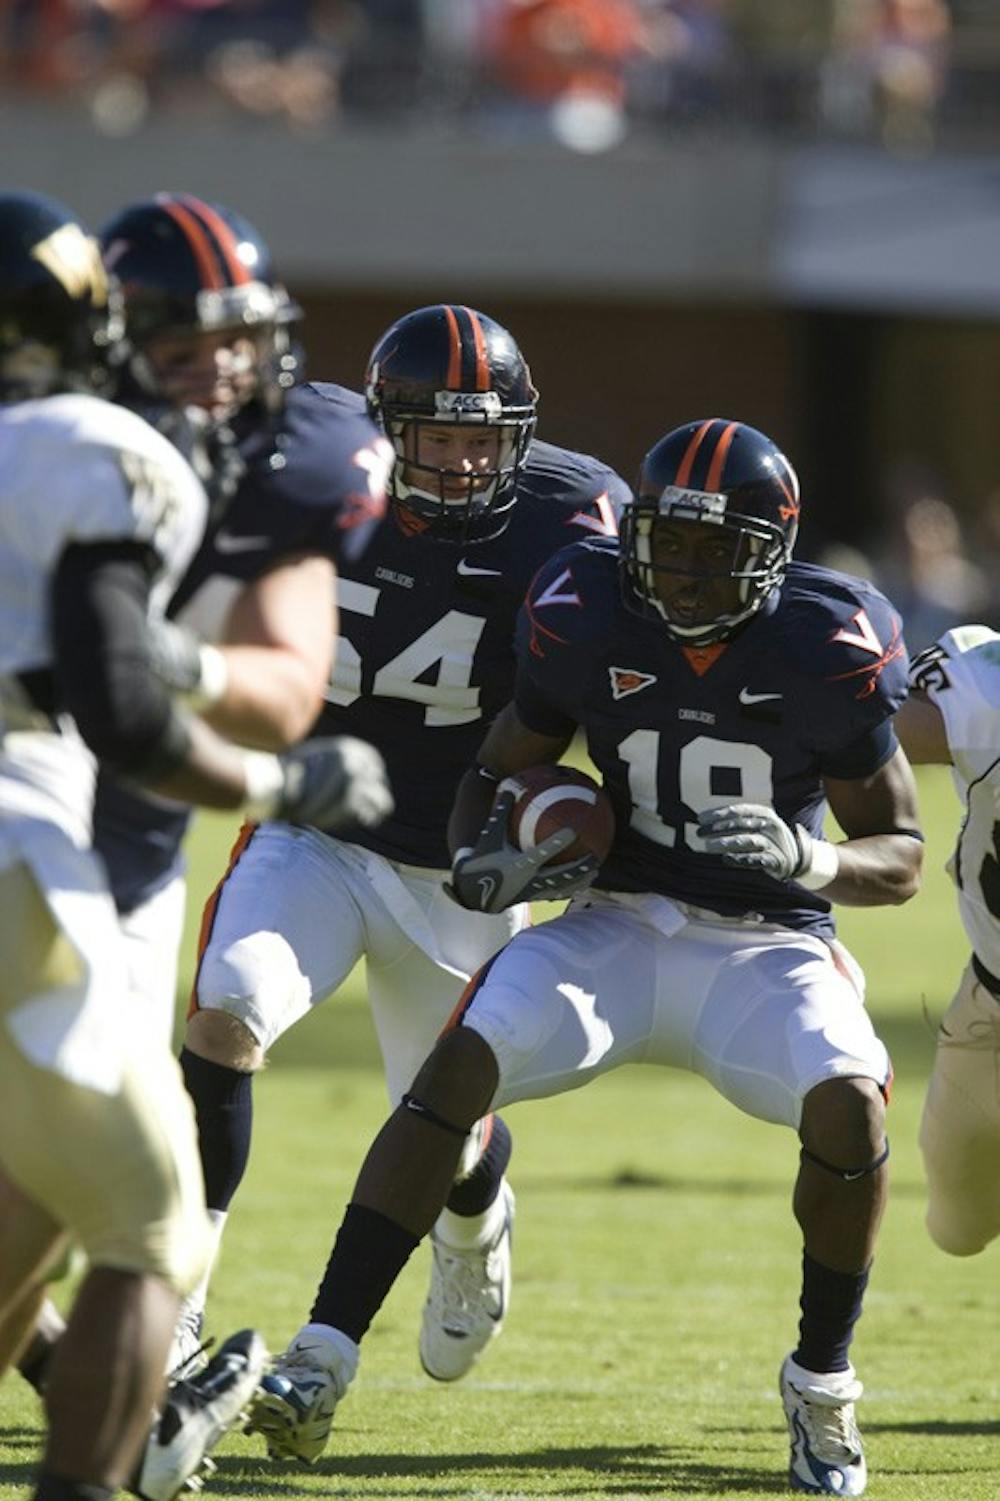 Virginia wide receiver Ras-I Dowling (19) returns an interception.  The #23 Virginia Cavaliers defeated the #24 Wake Forest Demon Deacons 17-16 at Scott Stadium in Charlottesville, VA on November 3, 2007.